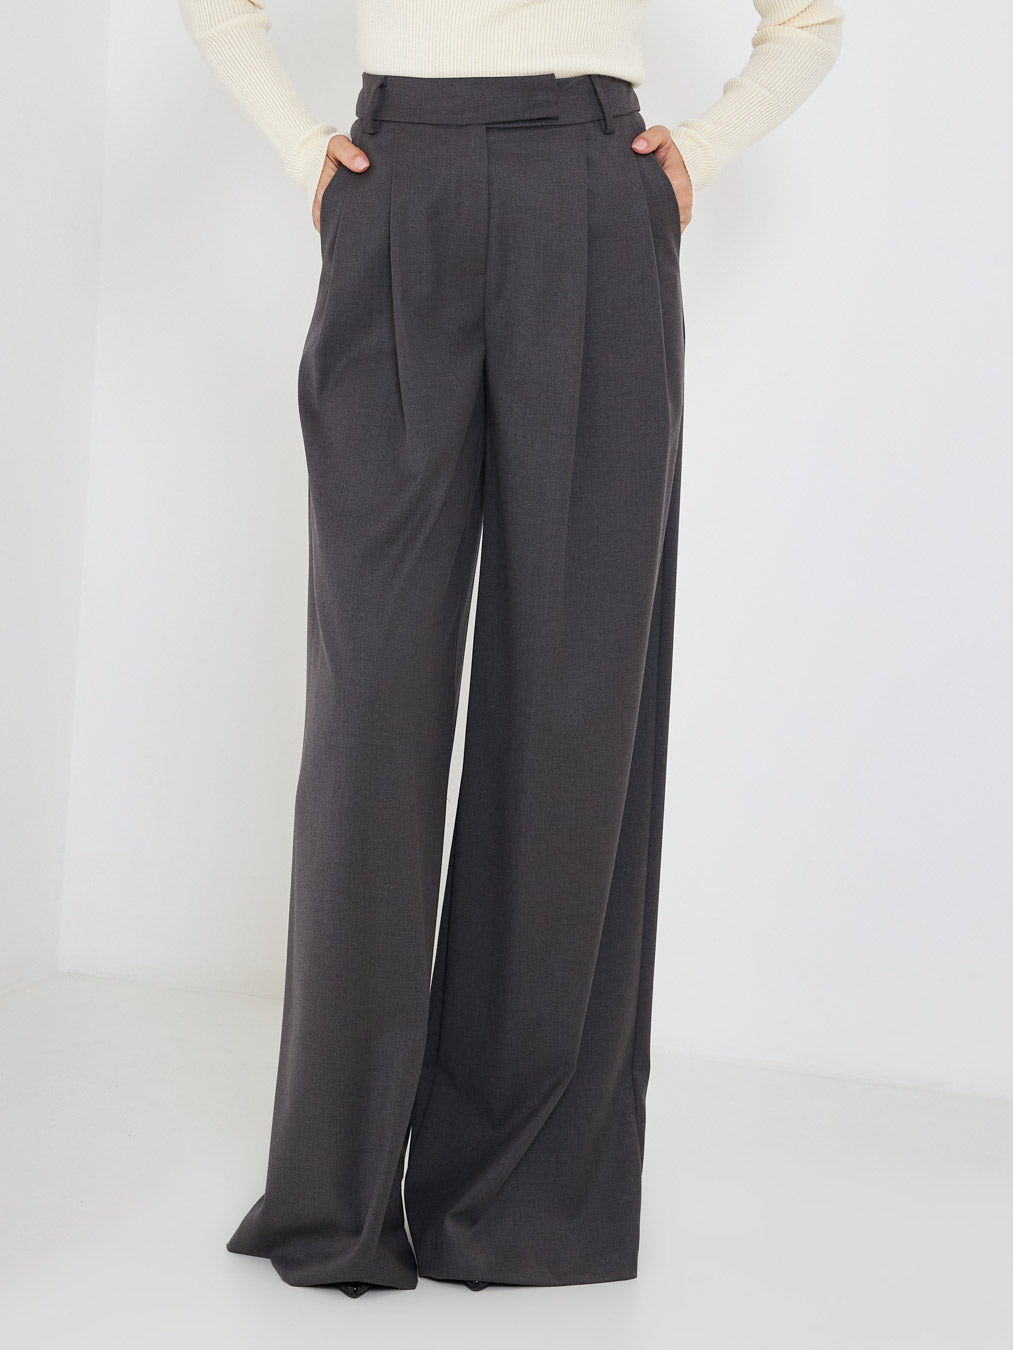 Kostumn gray trousers with pleats and wide bottom